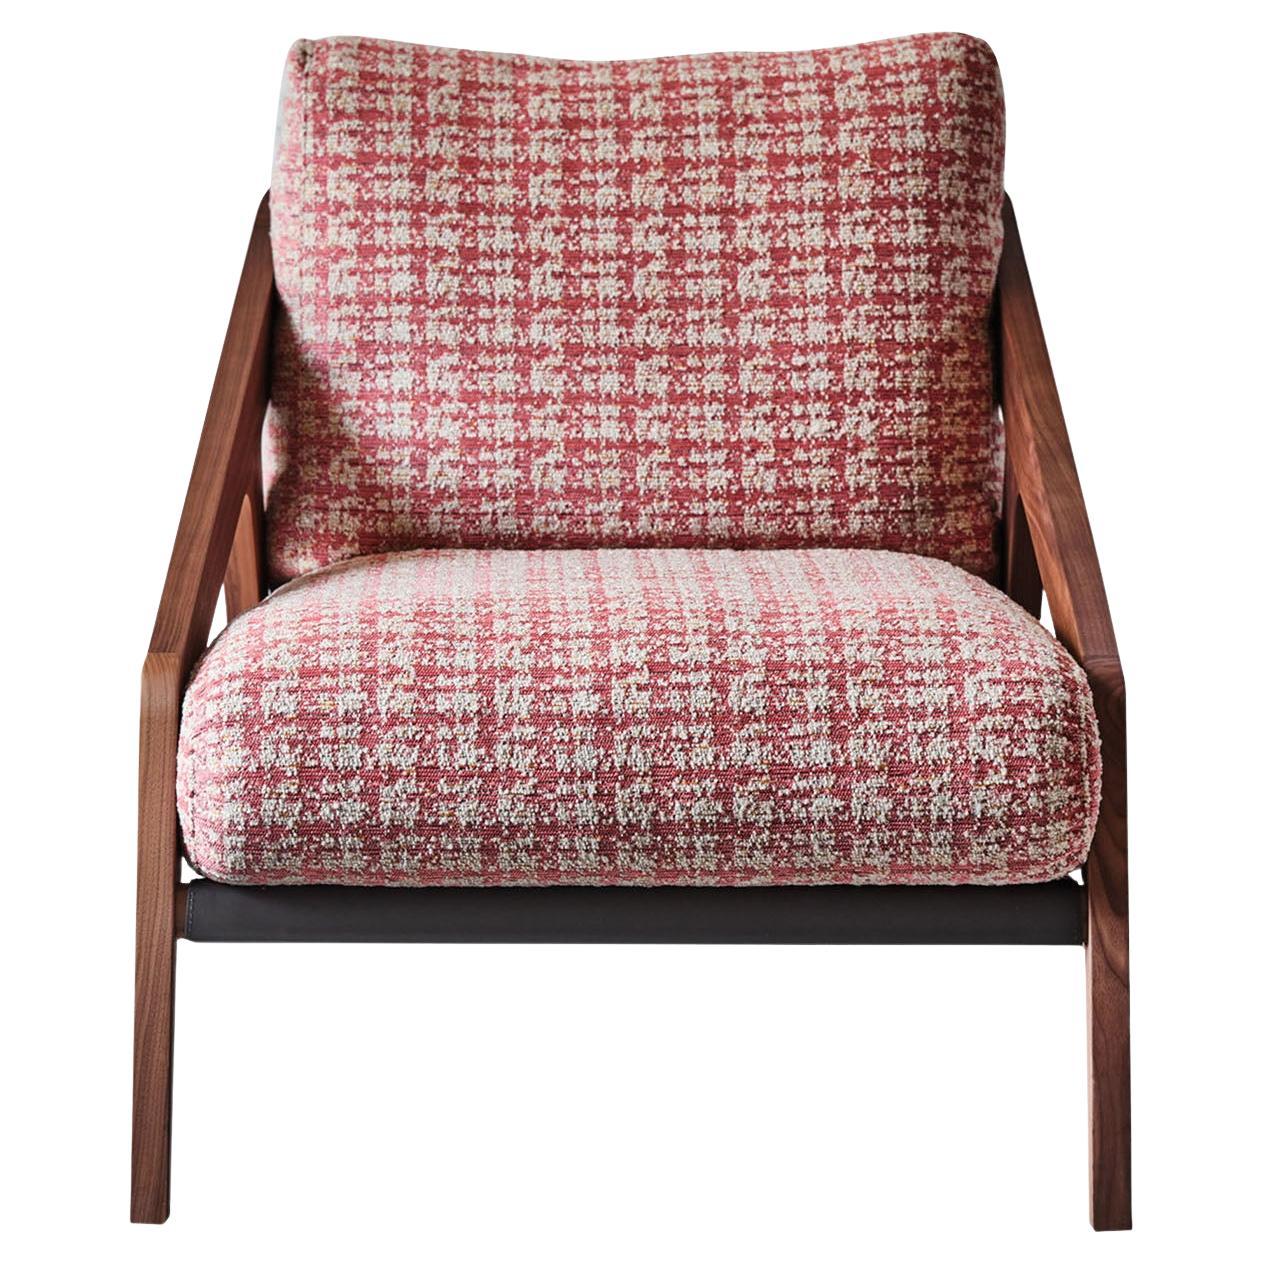 Frise' Patterned Armchair